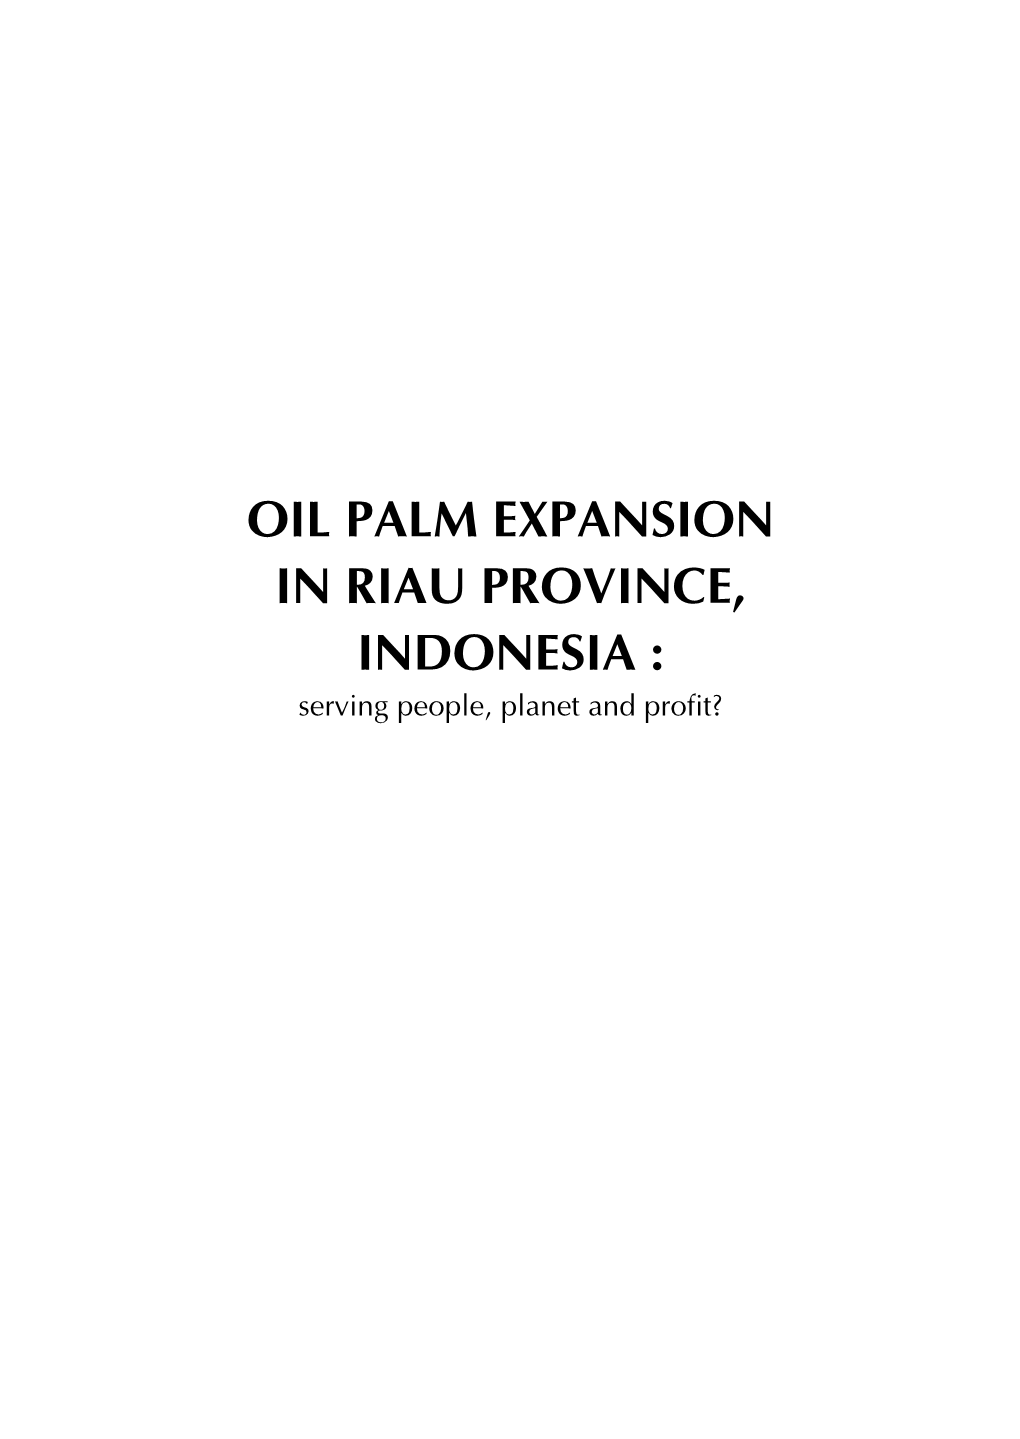 Oil Palm Expansion in Riau Province, Indonesia